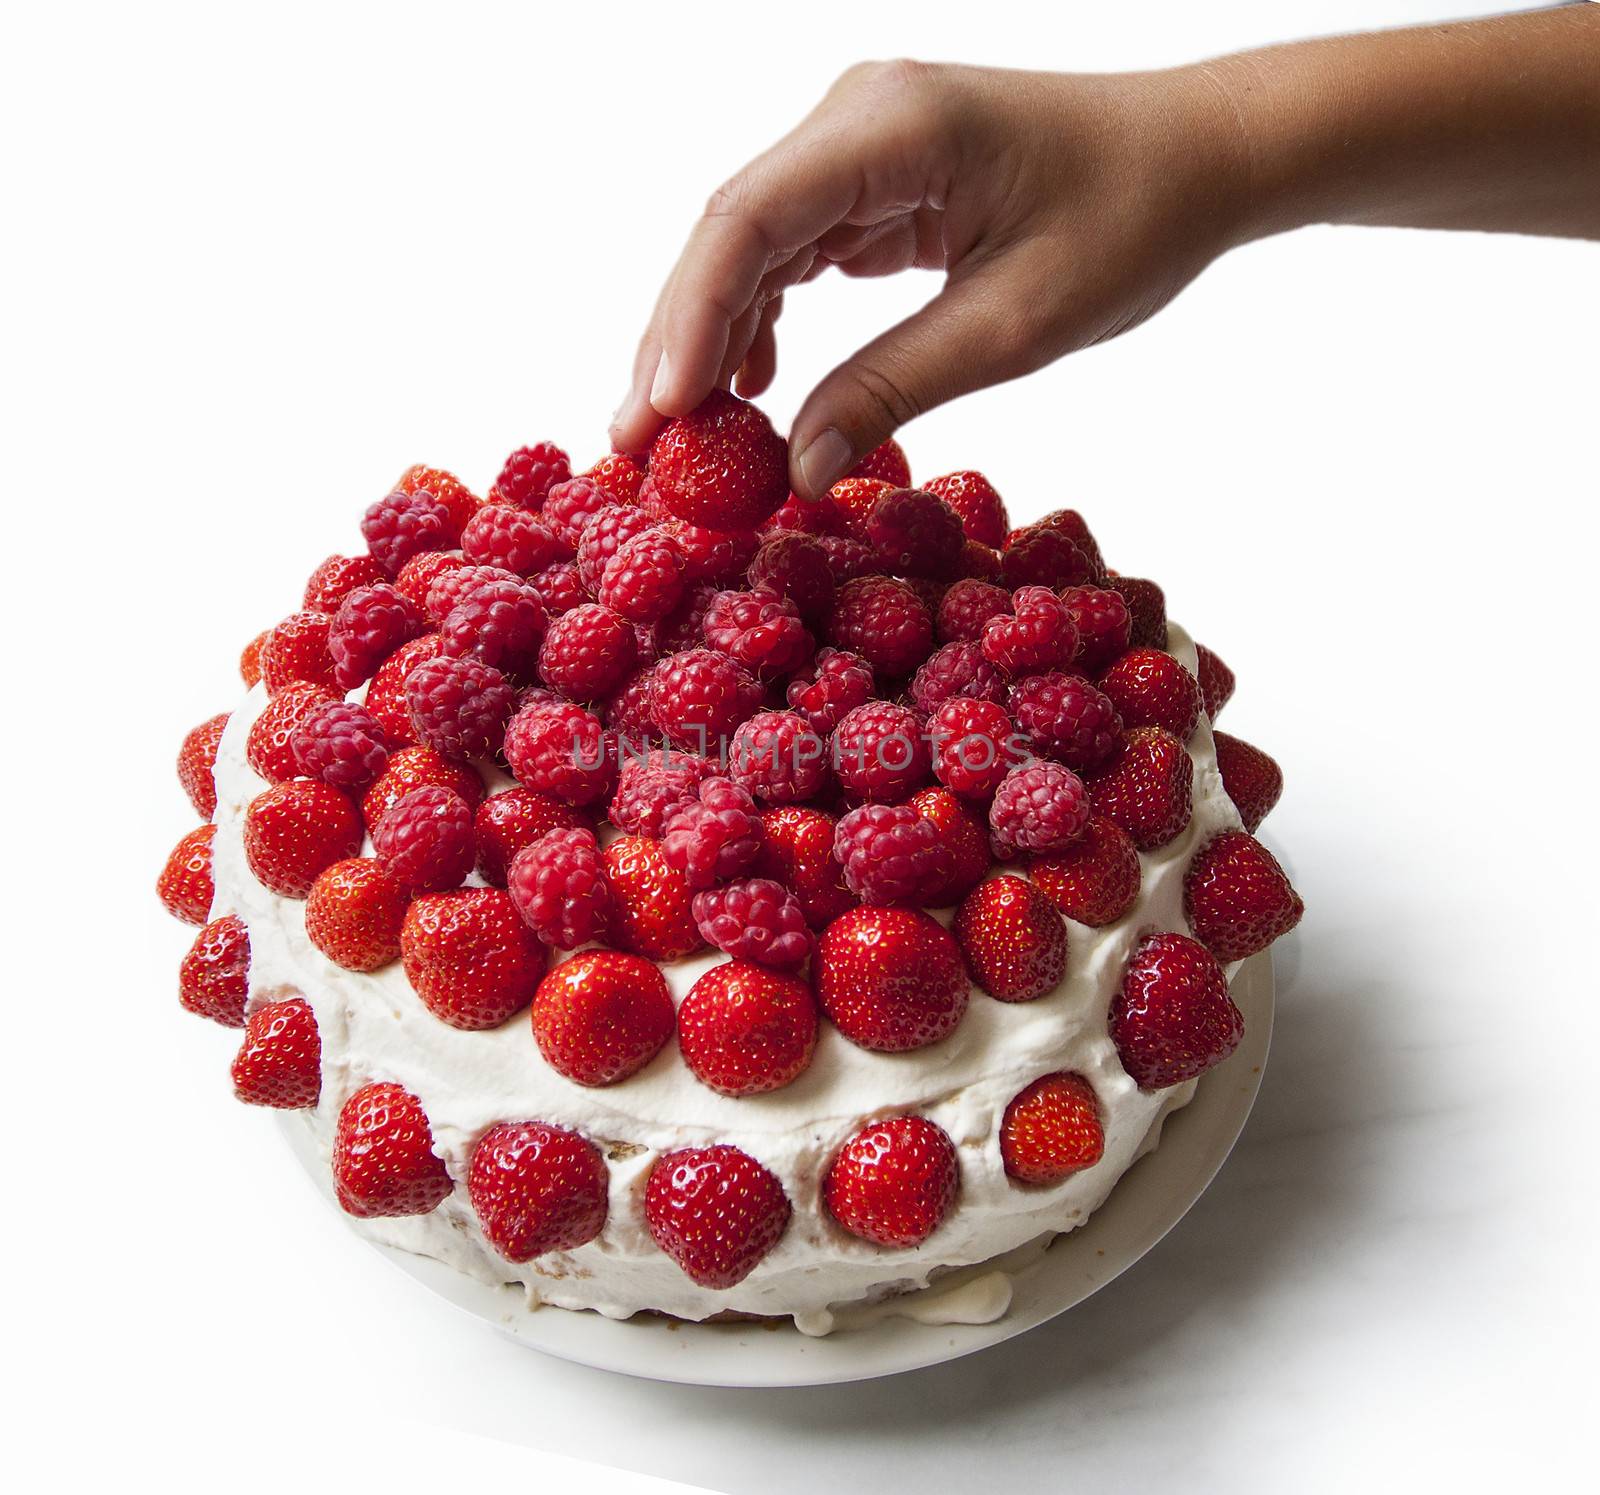 A layered sponge cake decorated with strawberries and raspberries with a hand picking of one berry. Isolated on white